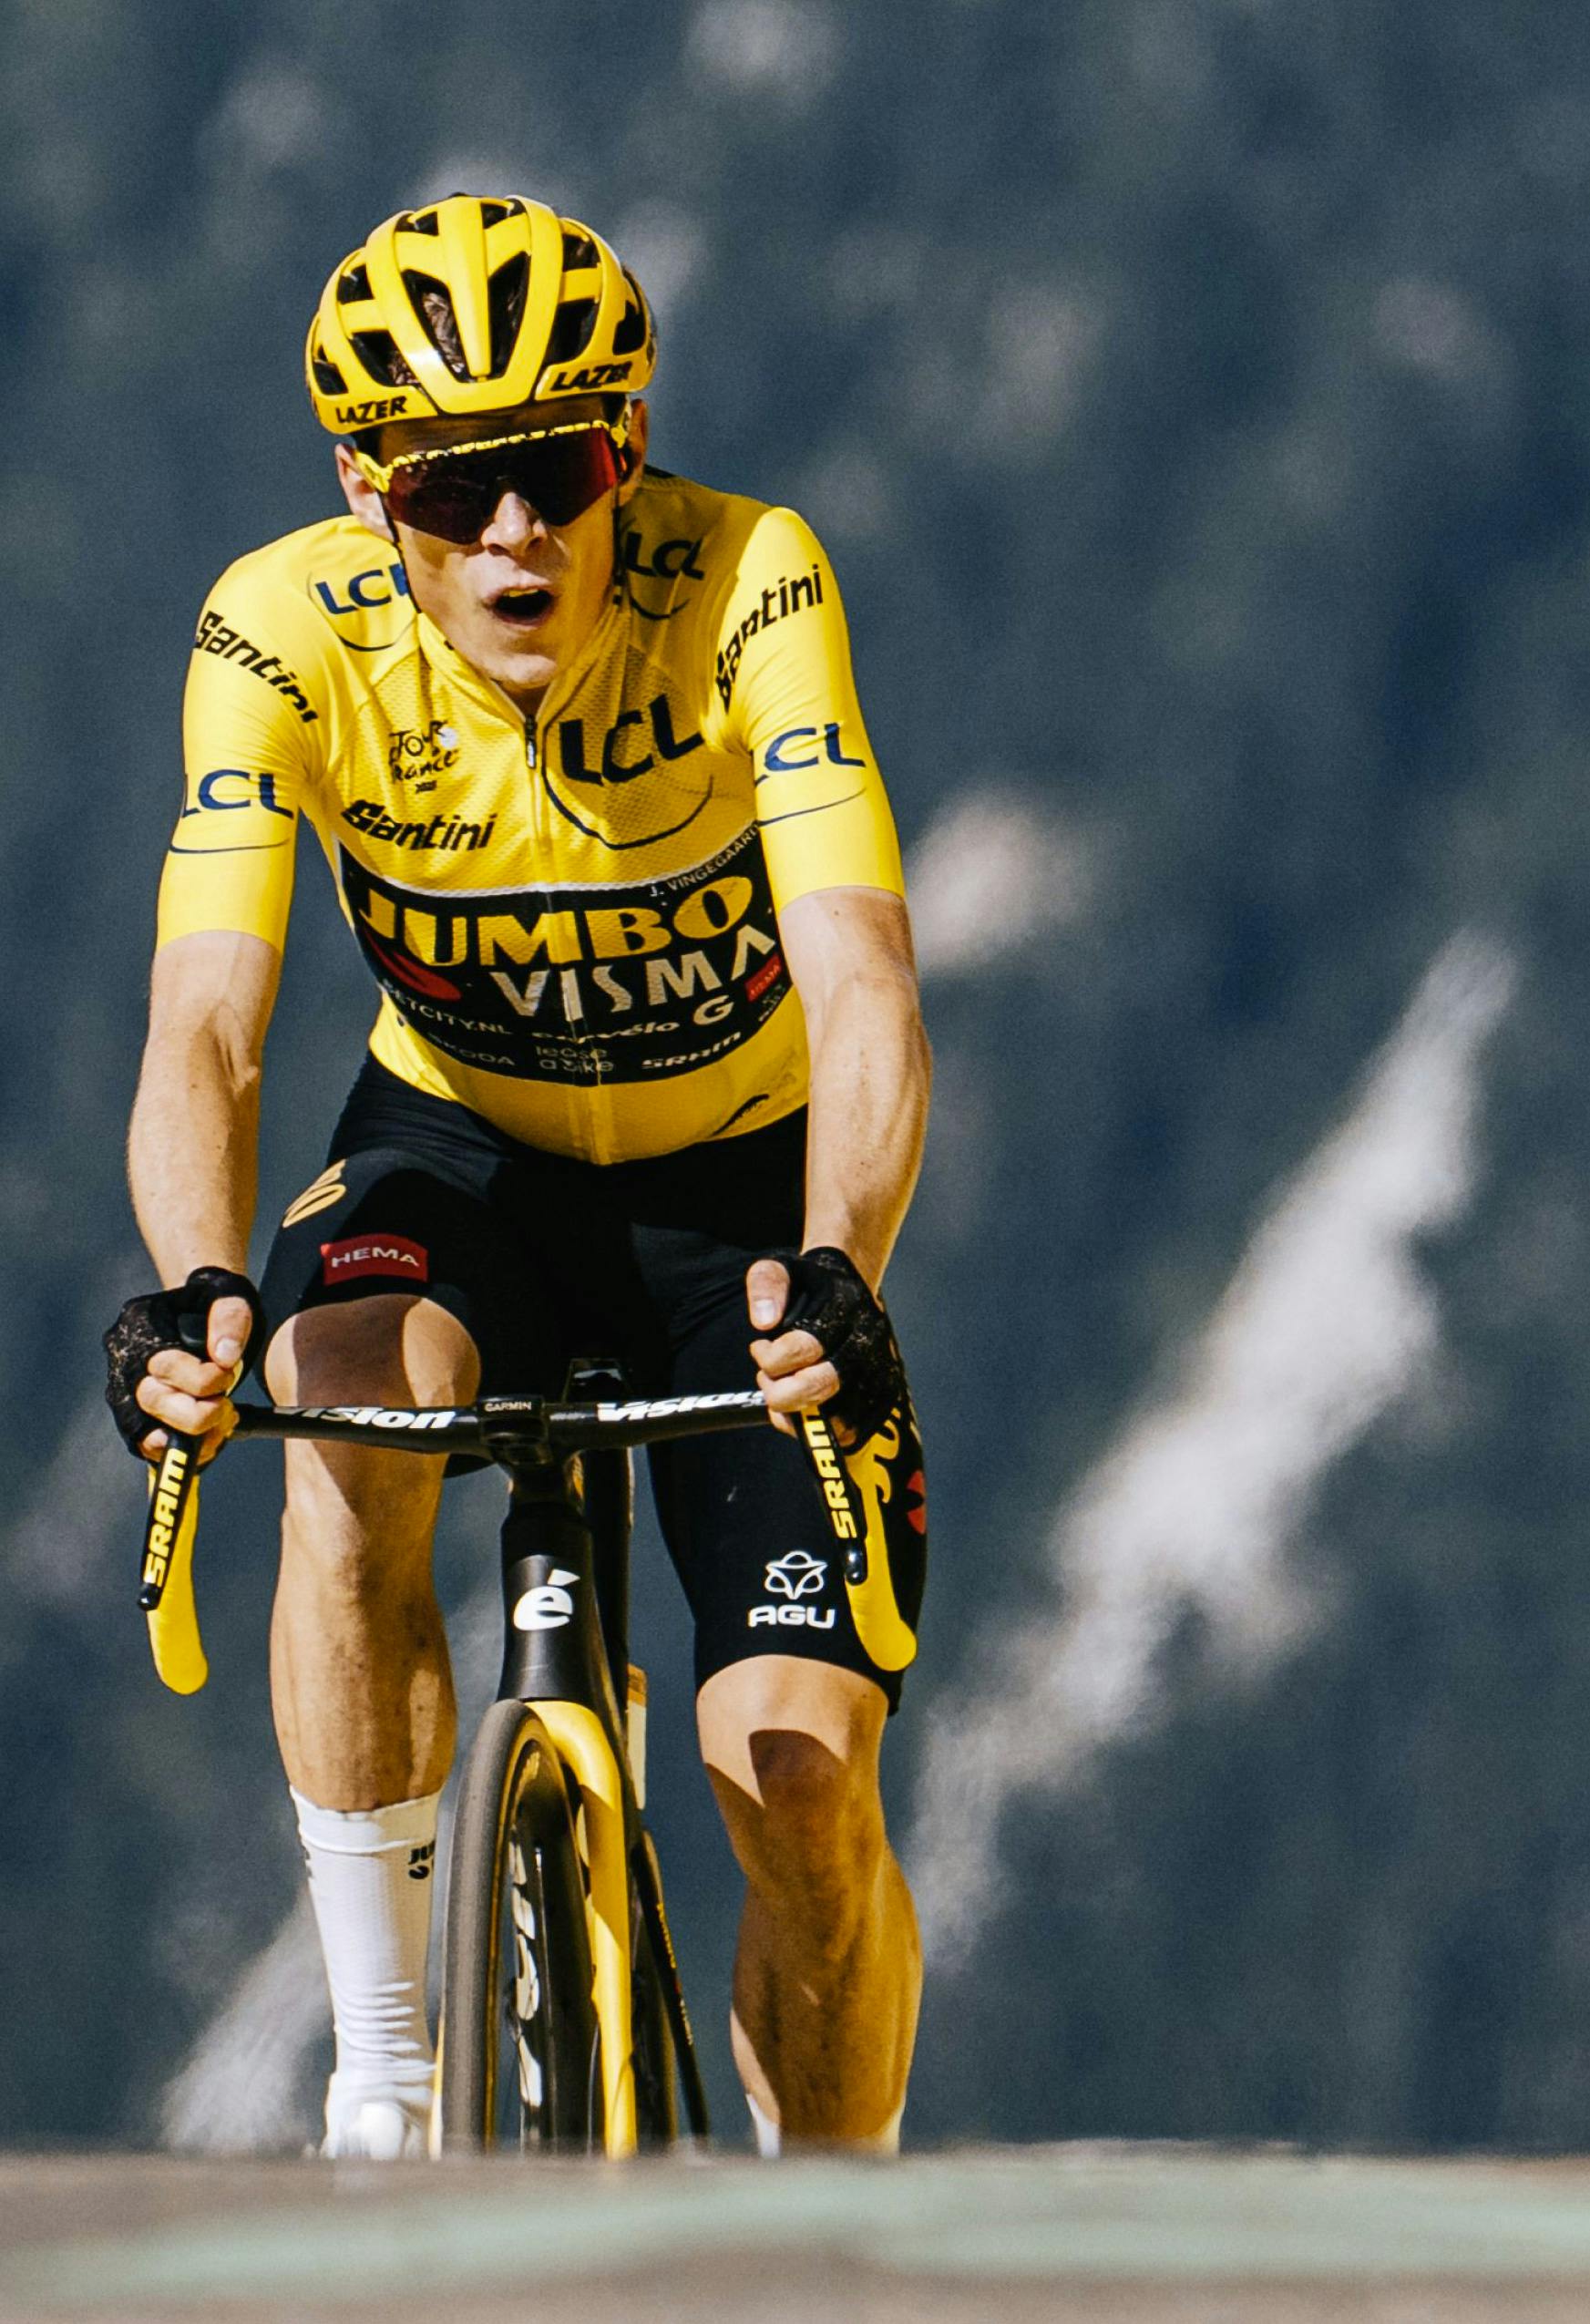 Jonas Vingegaard, wearing the yellow jersey, crests a mountaintop finish on his Cervélo R5.